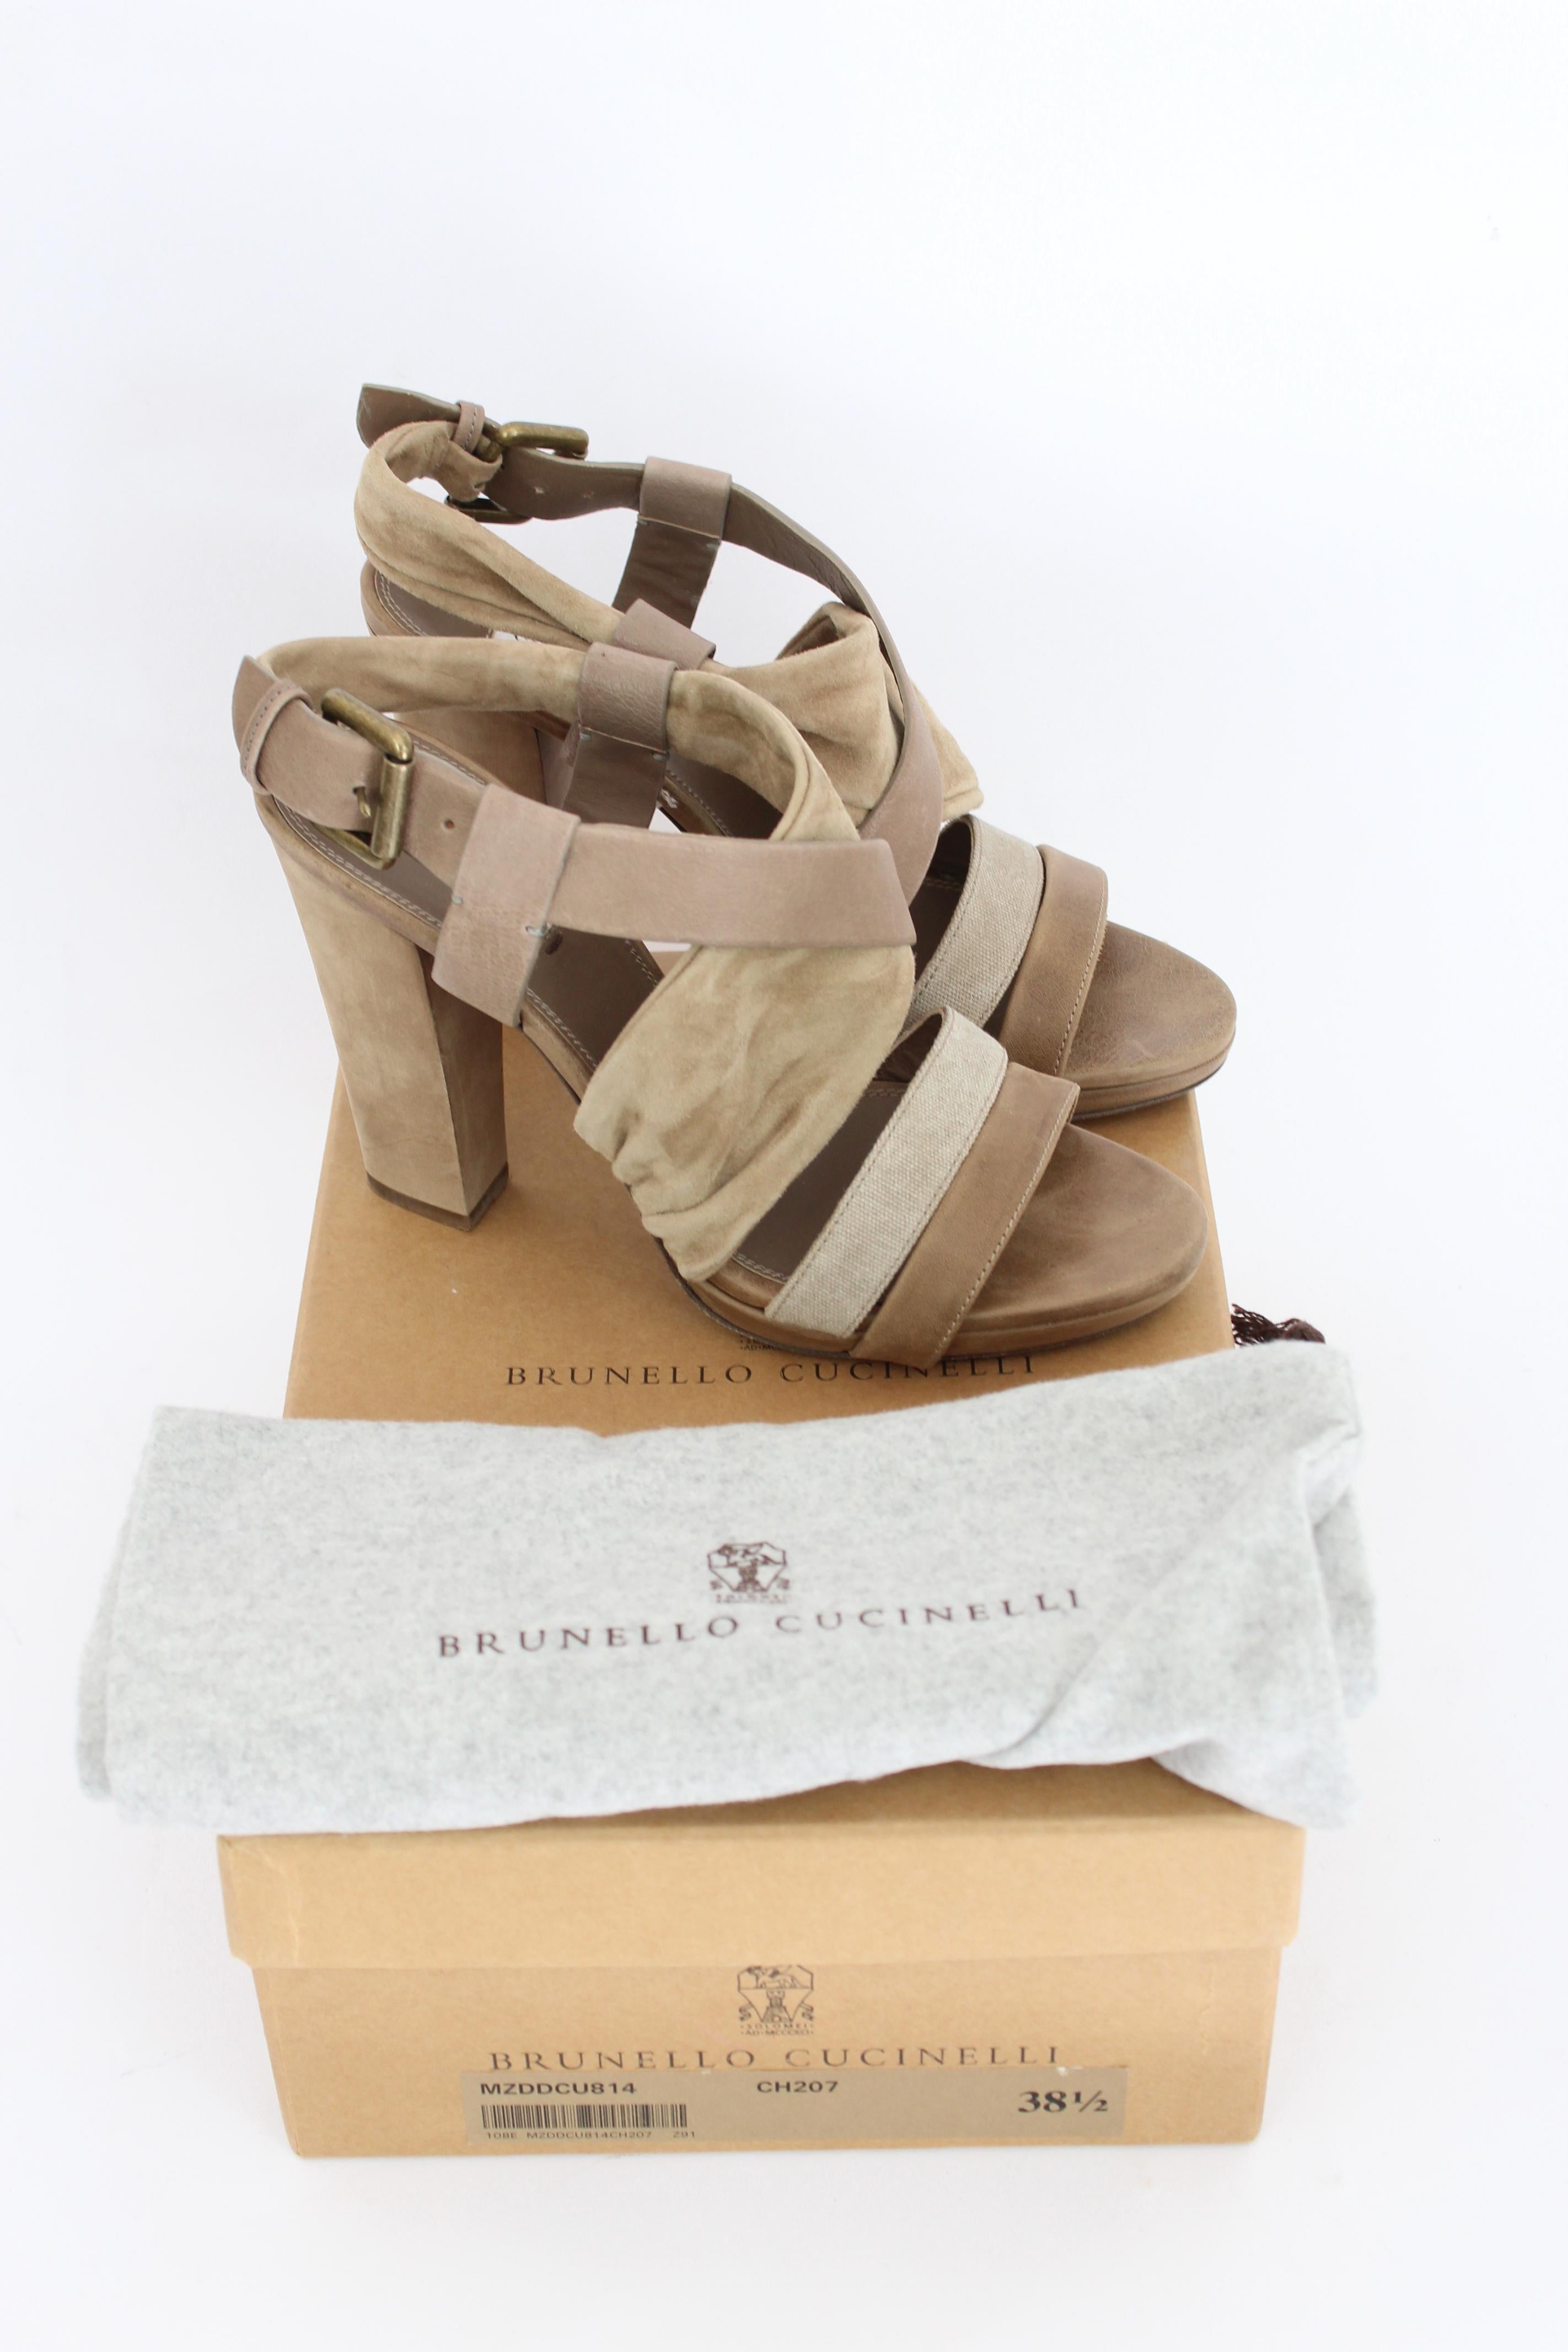 Brunello Cucinelli Beige Suede Leather Sandals Heels Shoes For Sale 2